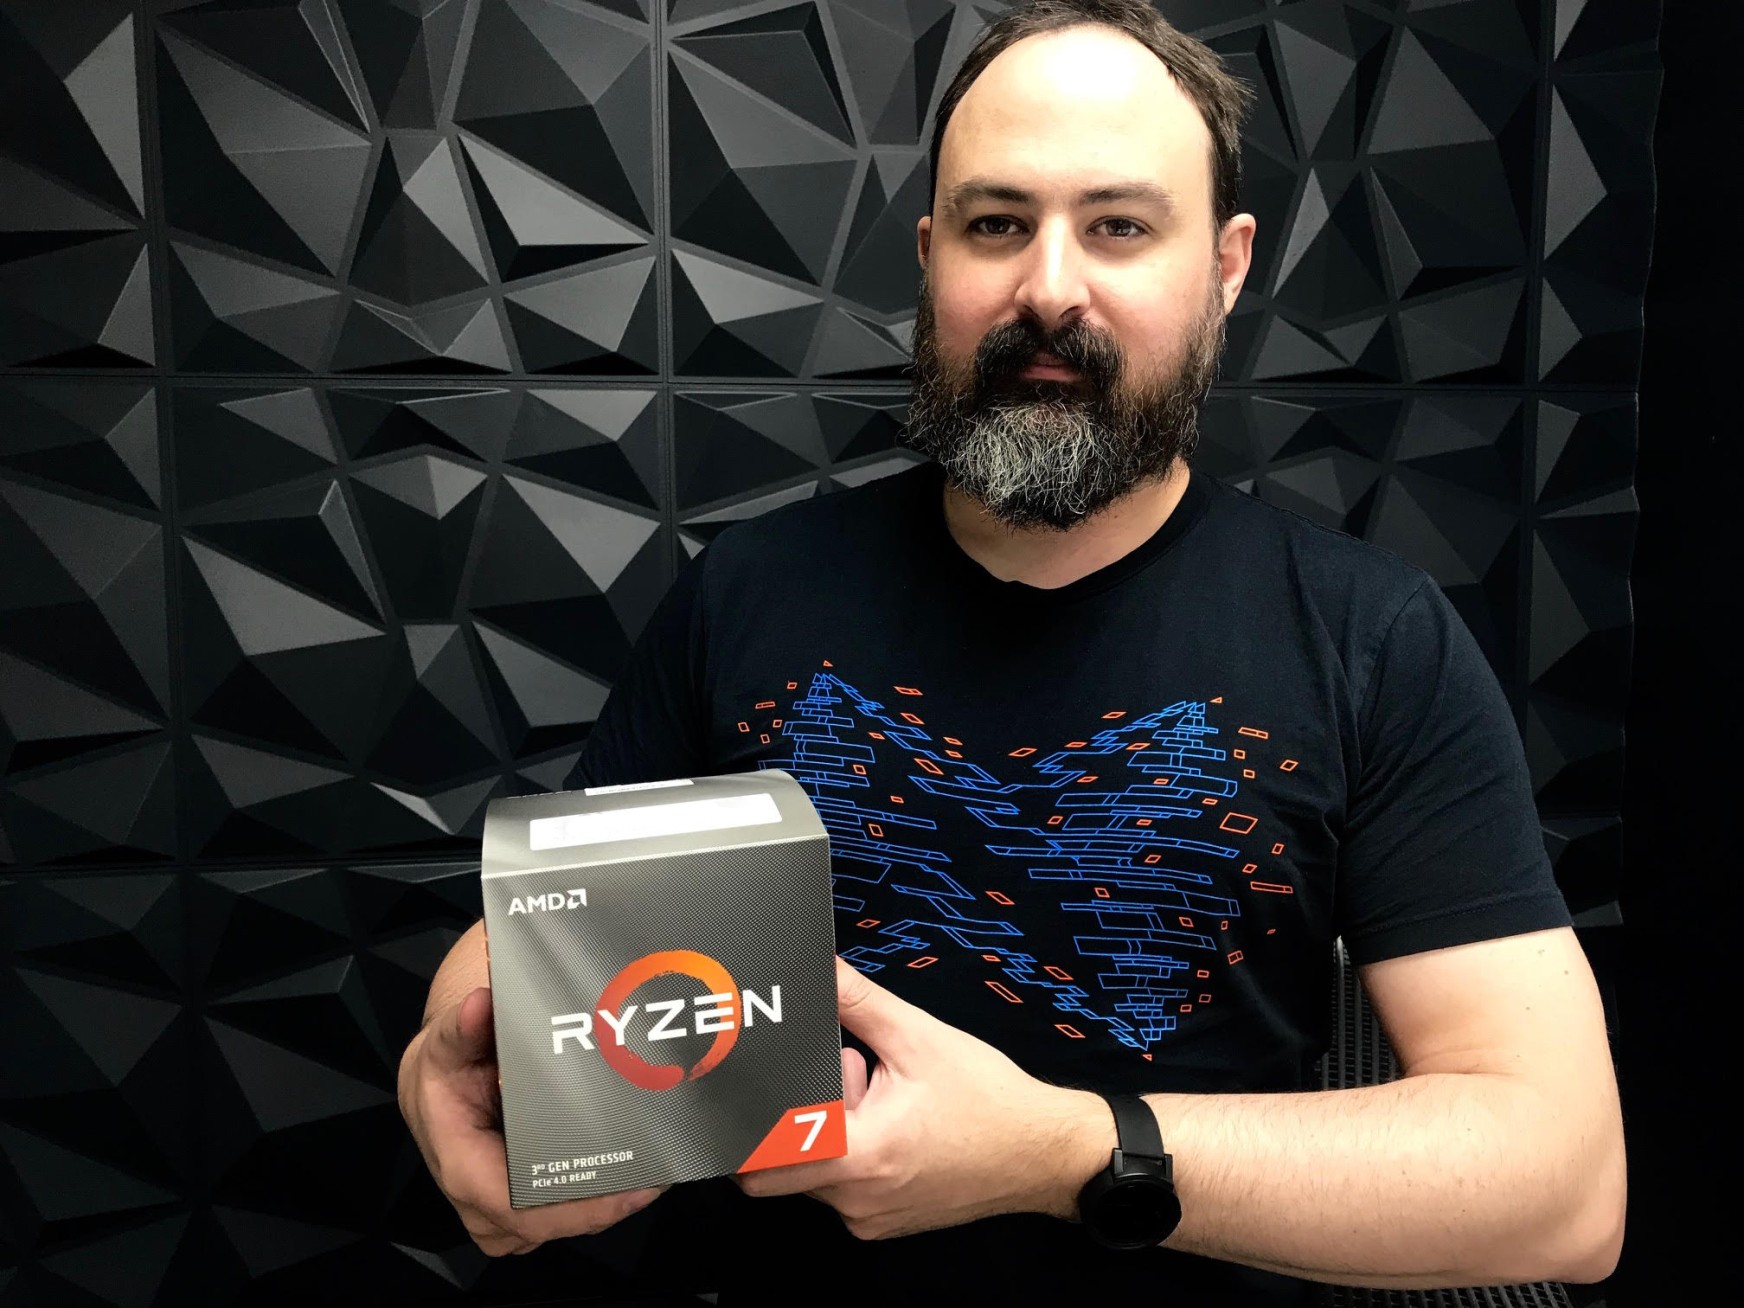 James from SiteHost holding a Ryzen box.